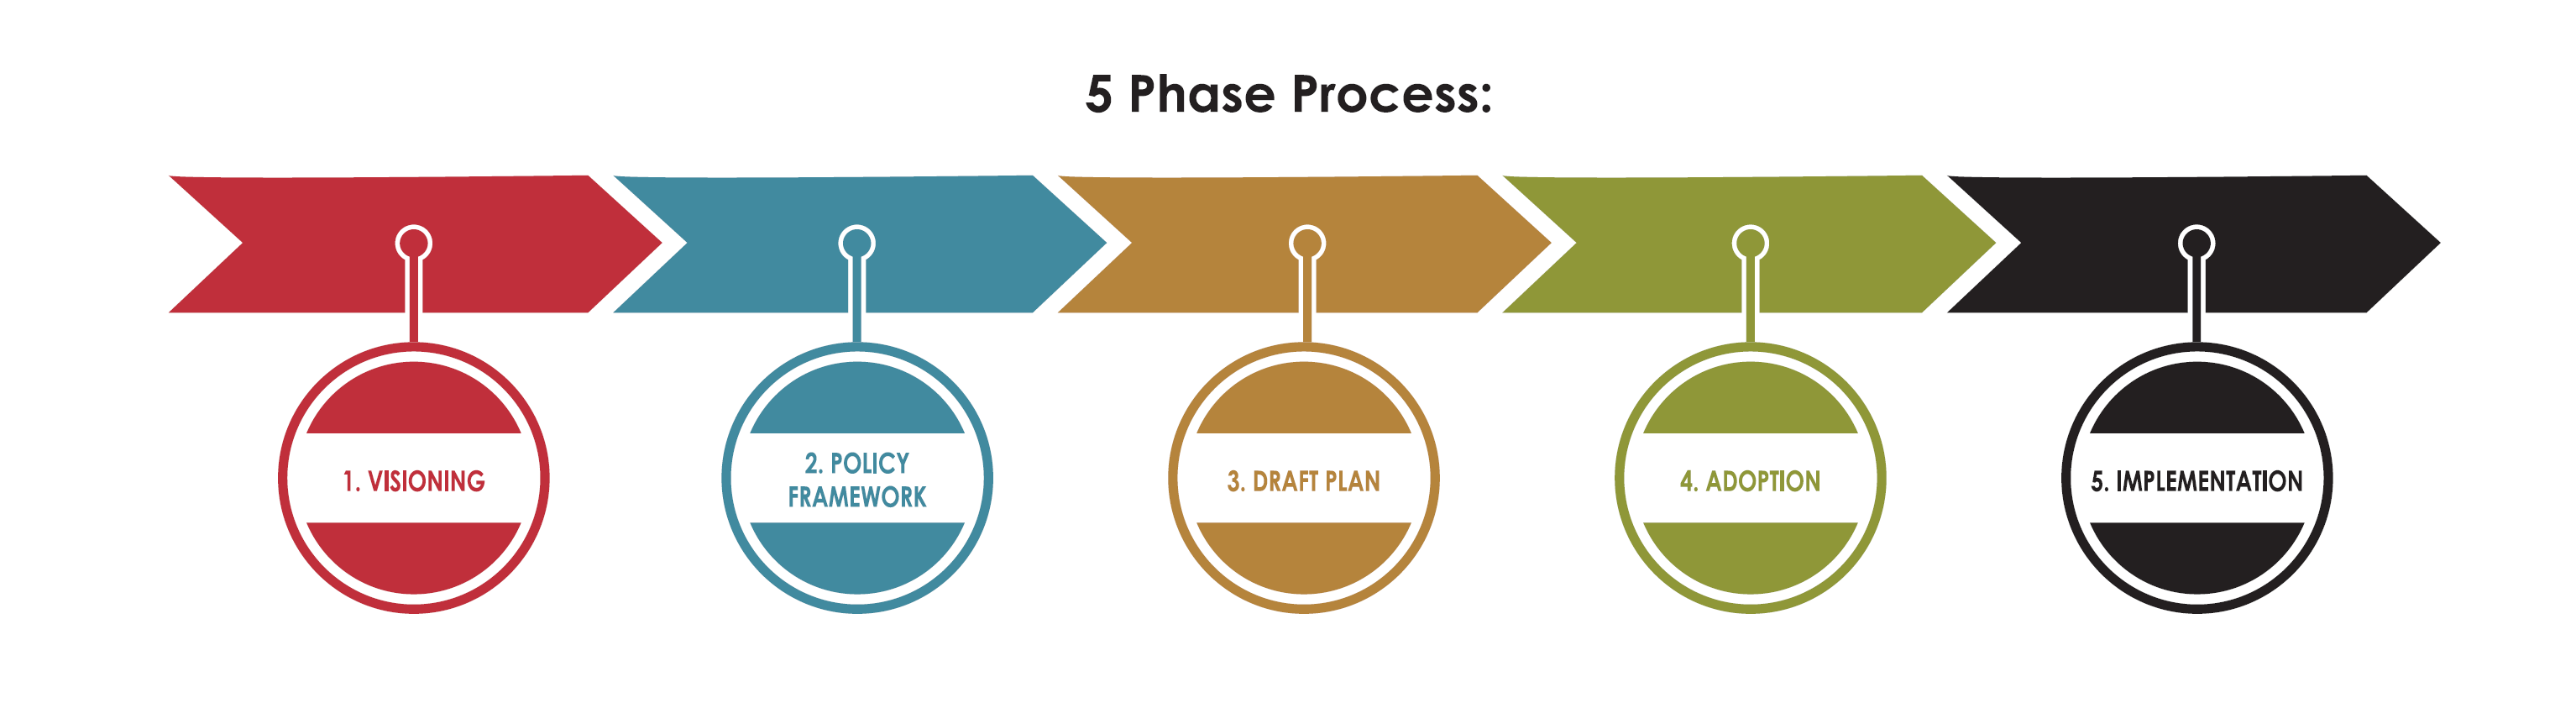 The 5 Phase Process is Phase 1: Visioning, Phase 2: Policy Framework, Phase 3: Draft Plan, Phase 4: Adoption, and Phase 5: Implementation